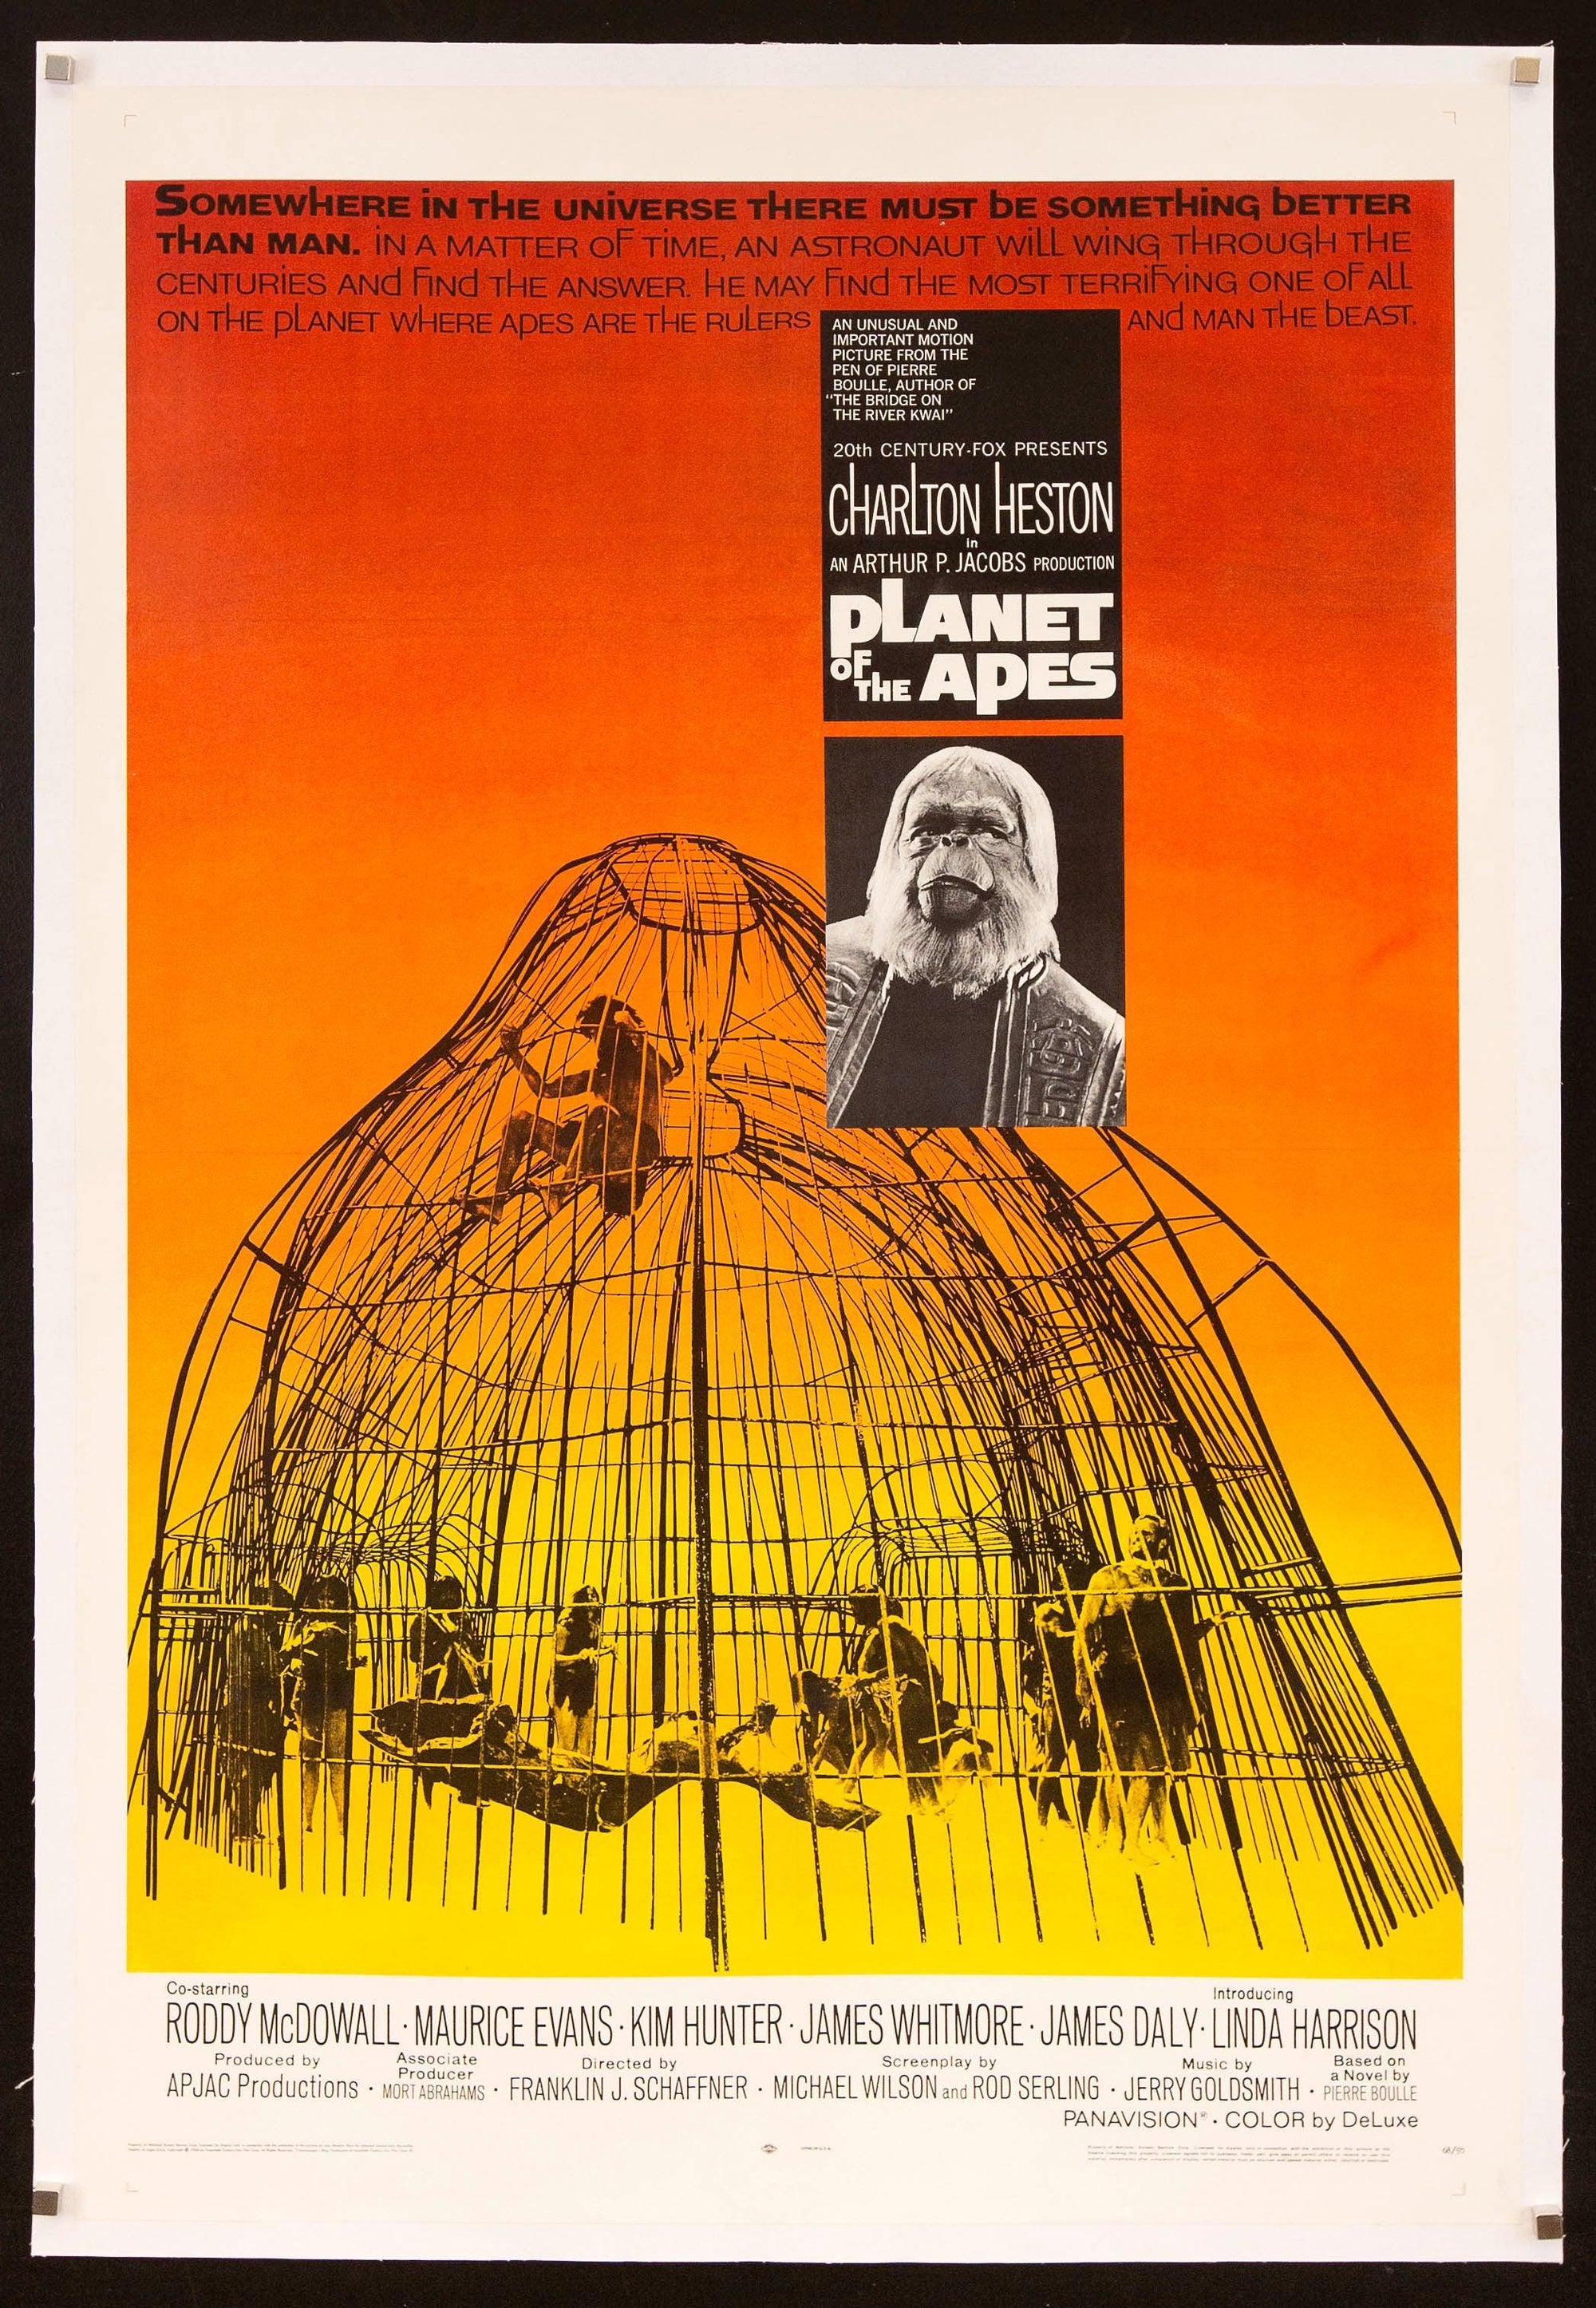 Planet of the Apes 1 Sheet (27x41) Original Vintage Movie Poster